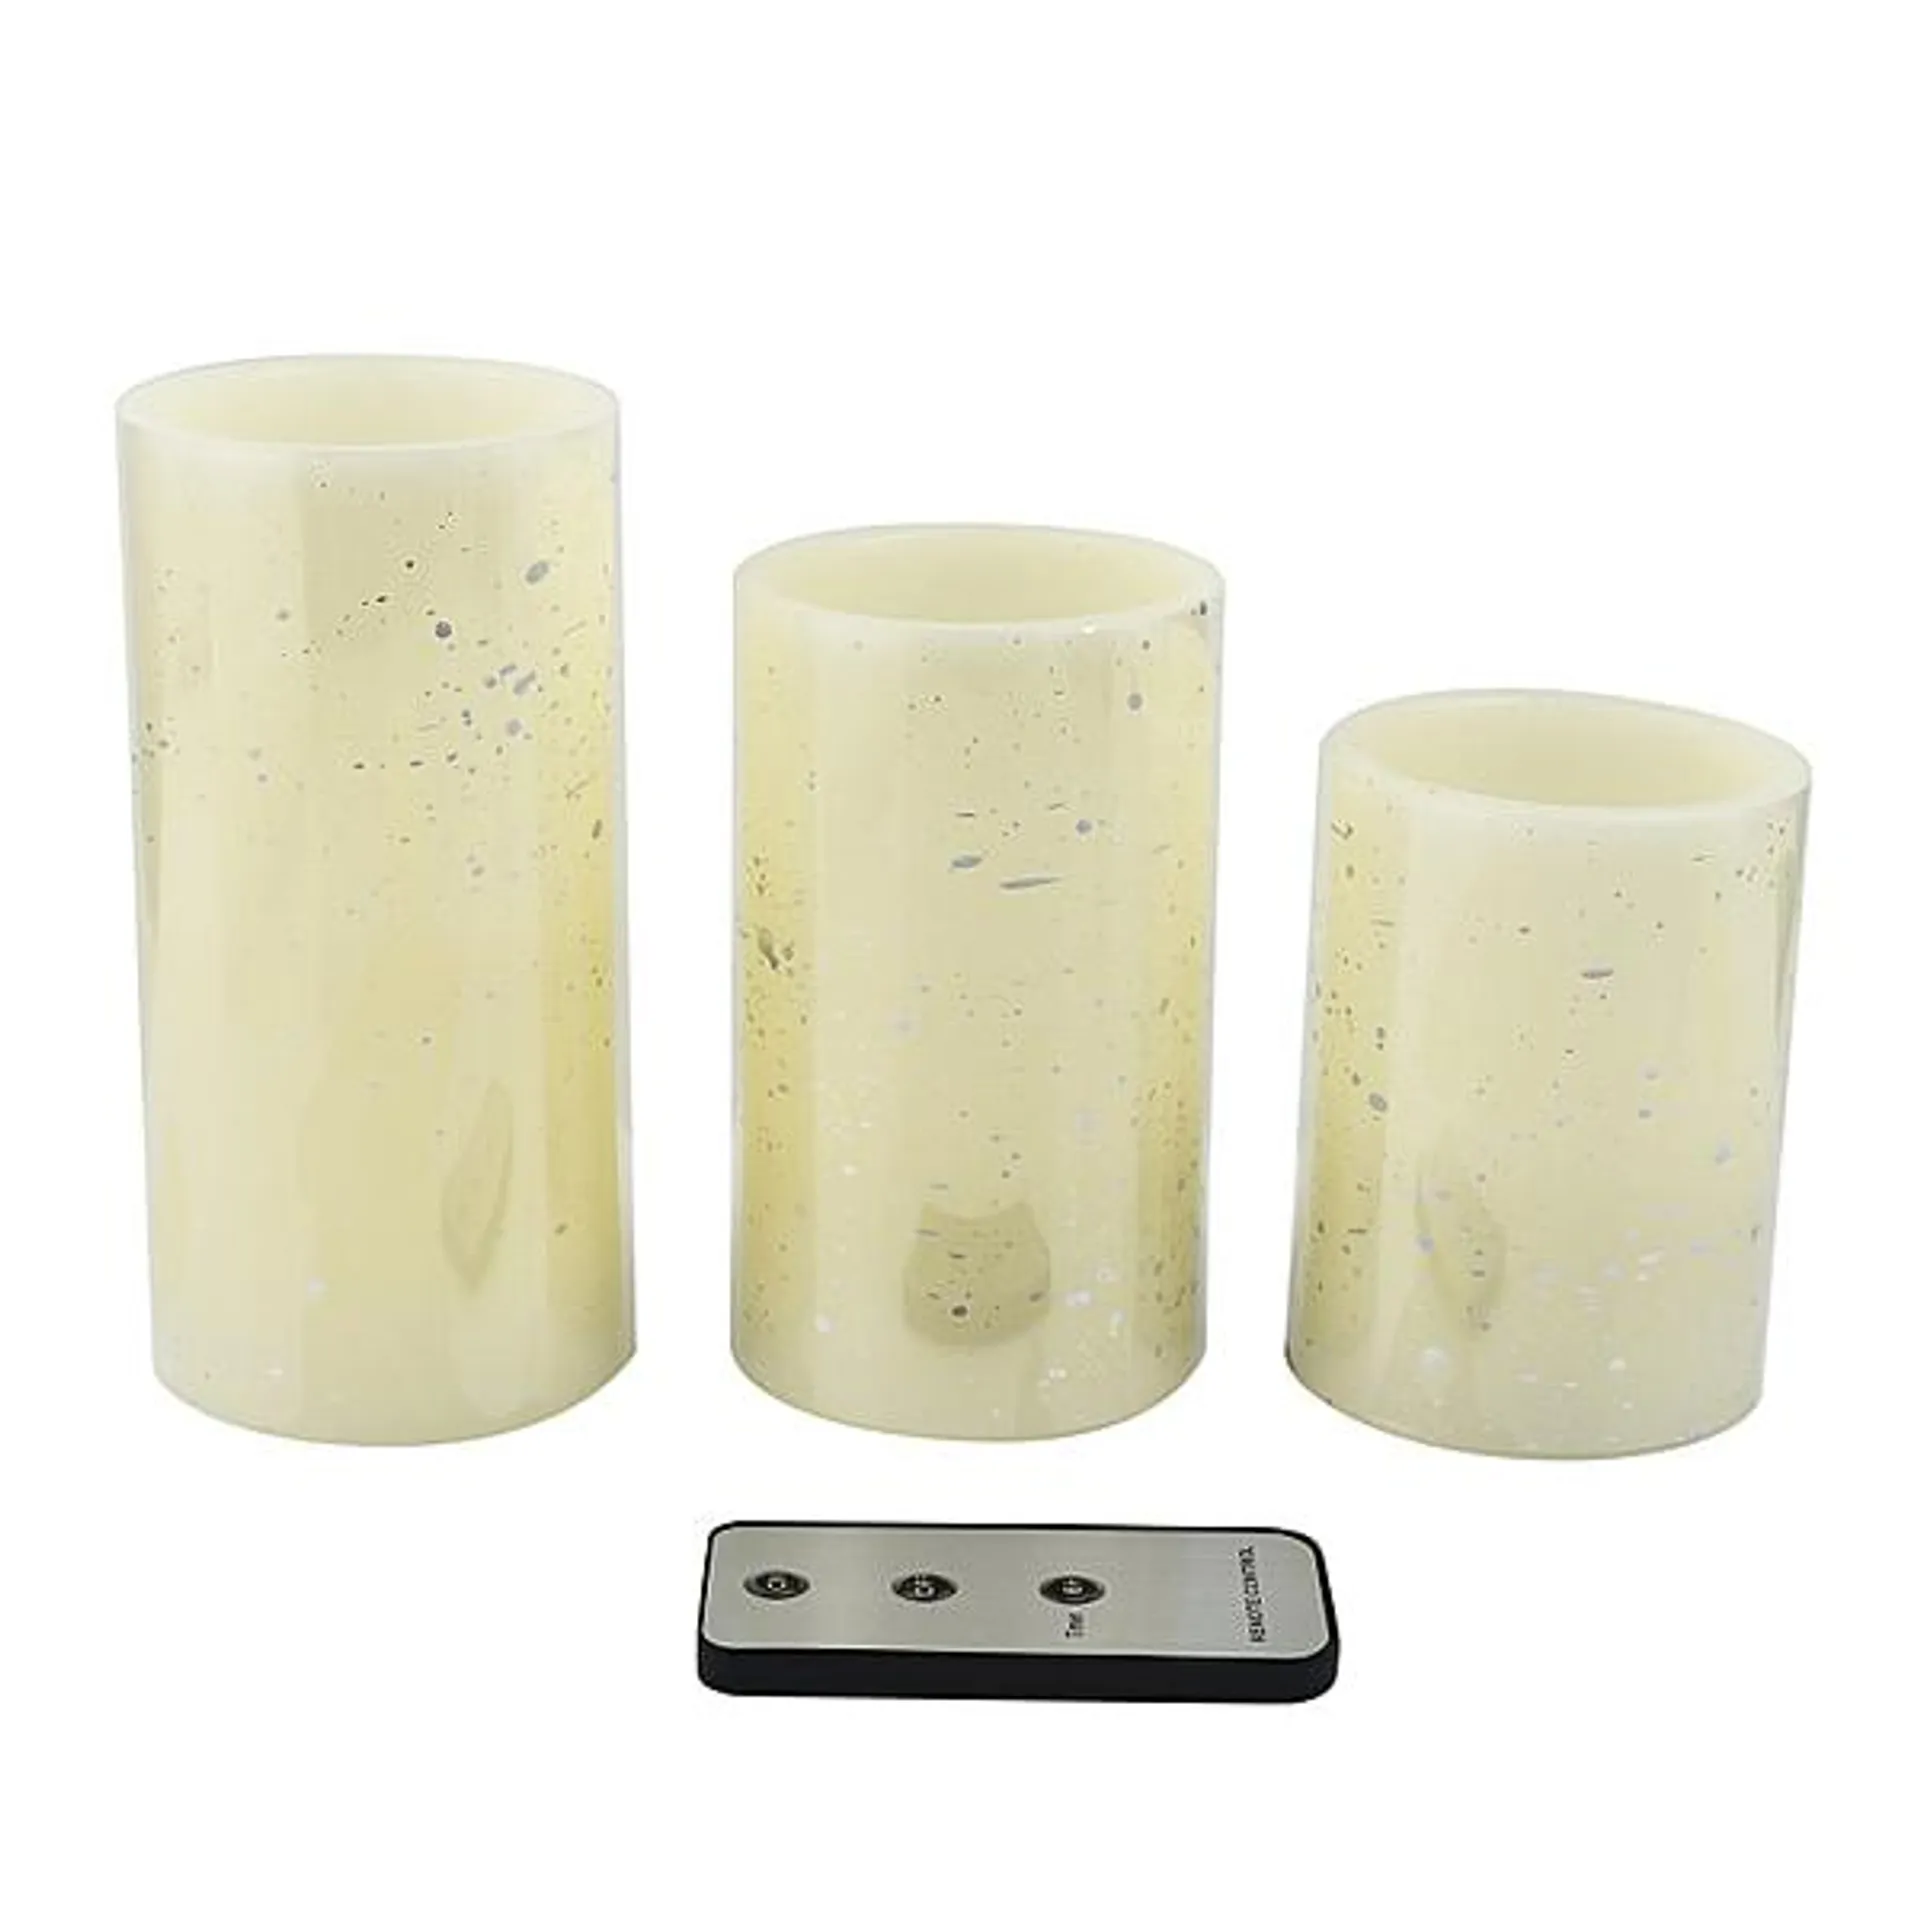 3 Pcs Speckled LED Candle Set with Remote - Hand Made with Wax (6 X AA Battery not Included)